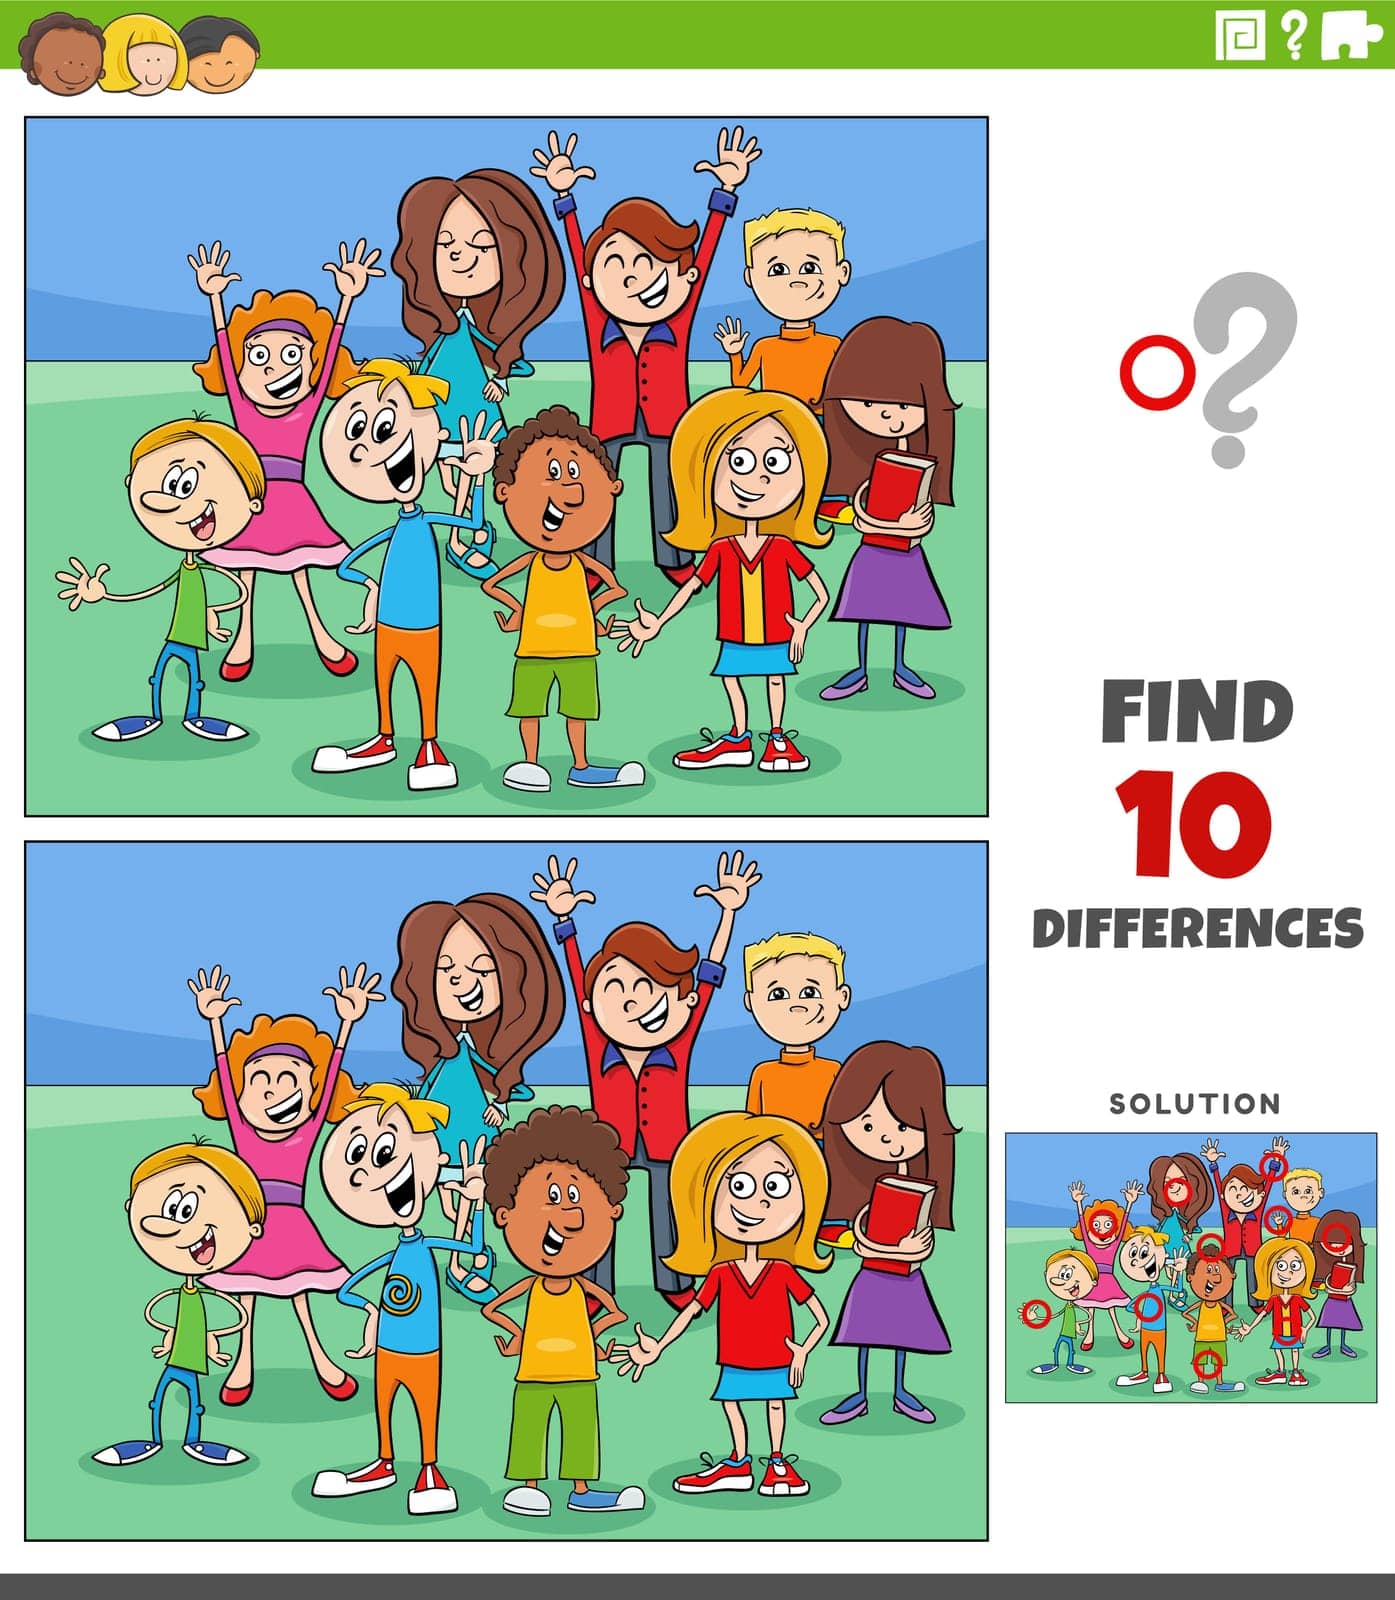 differences game with cartoon children characters group by izakowski